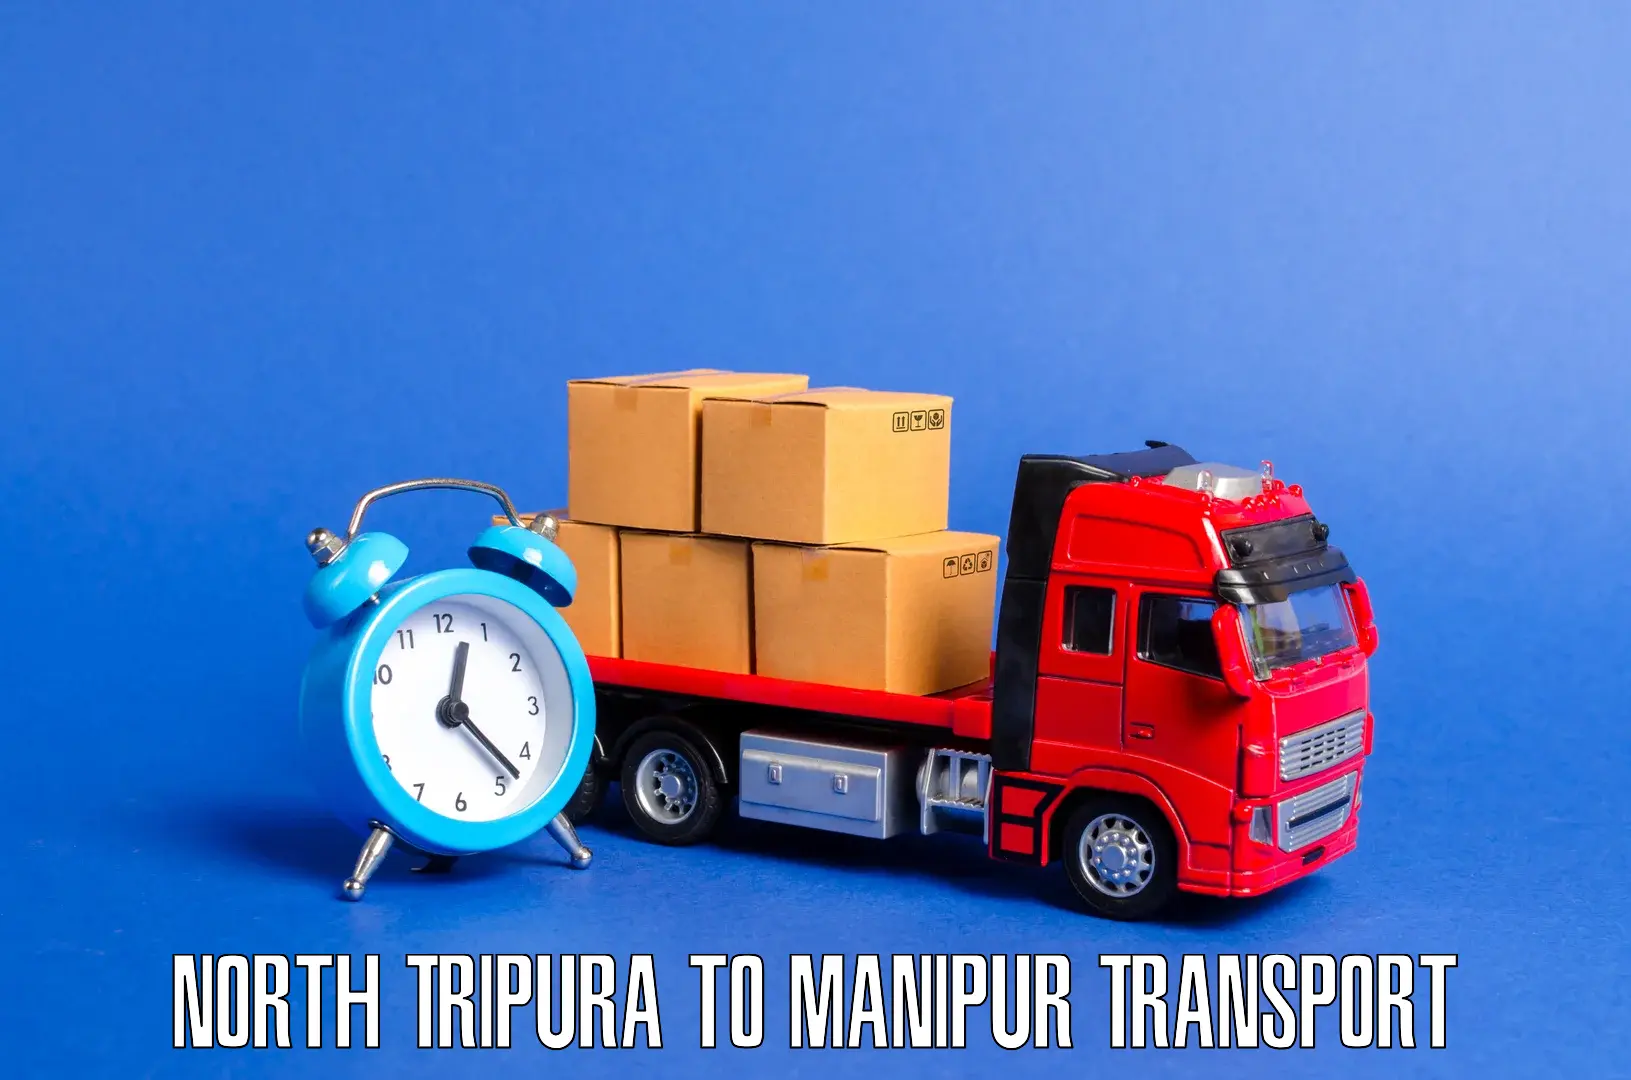 Daily transport service North Tripura to Imphal